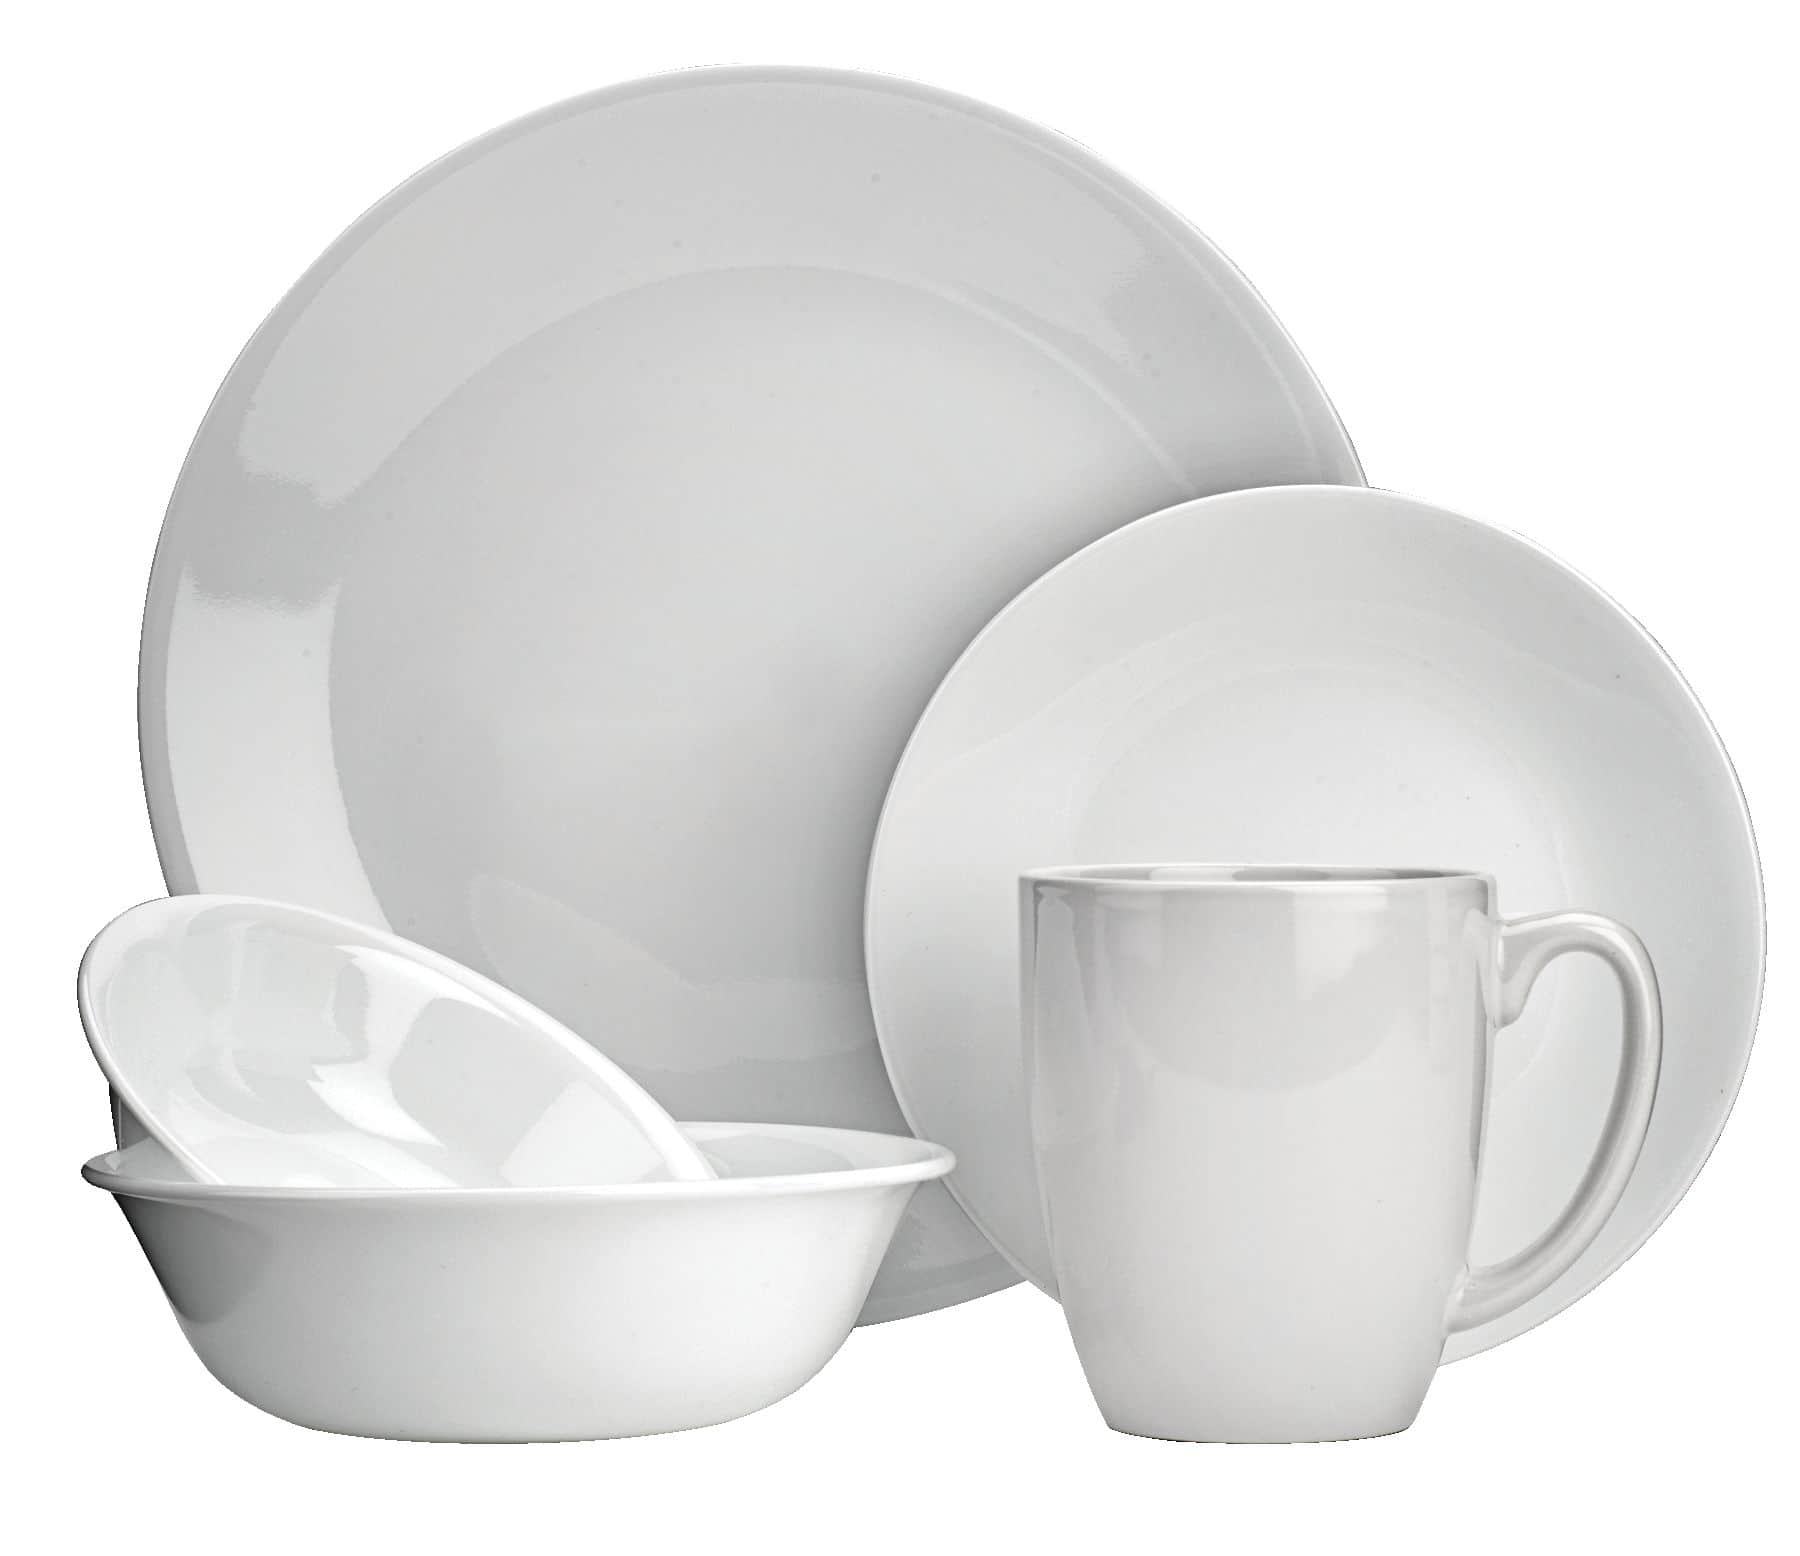 https://media-www.canadiantire.ca/product/living/kitchen/dining-and-entertaining/1427027/corelle-30pc-winter-frost-white-85dc9286-03a8-4d1a-a739-94c885e7d7f7-jpgrendition.jpg